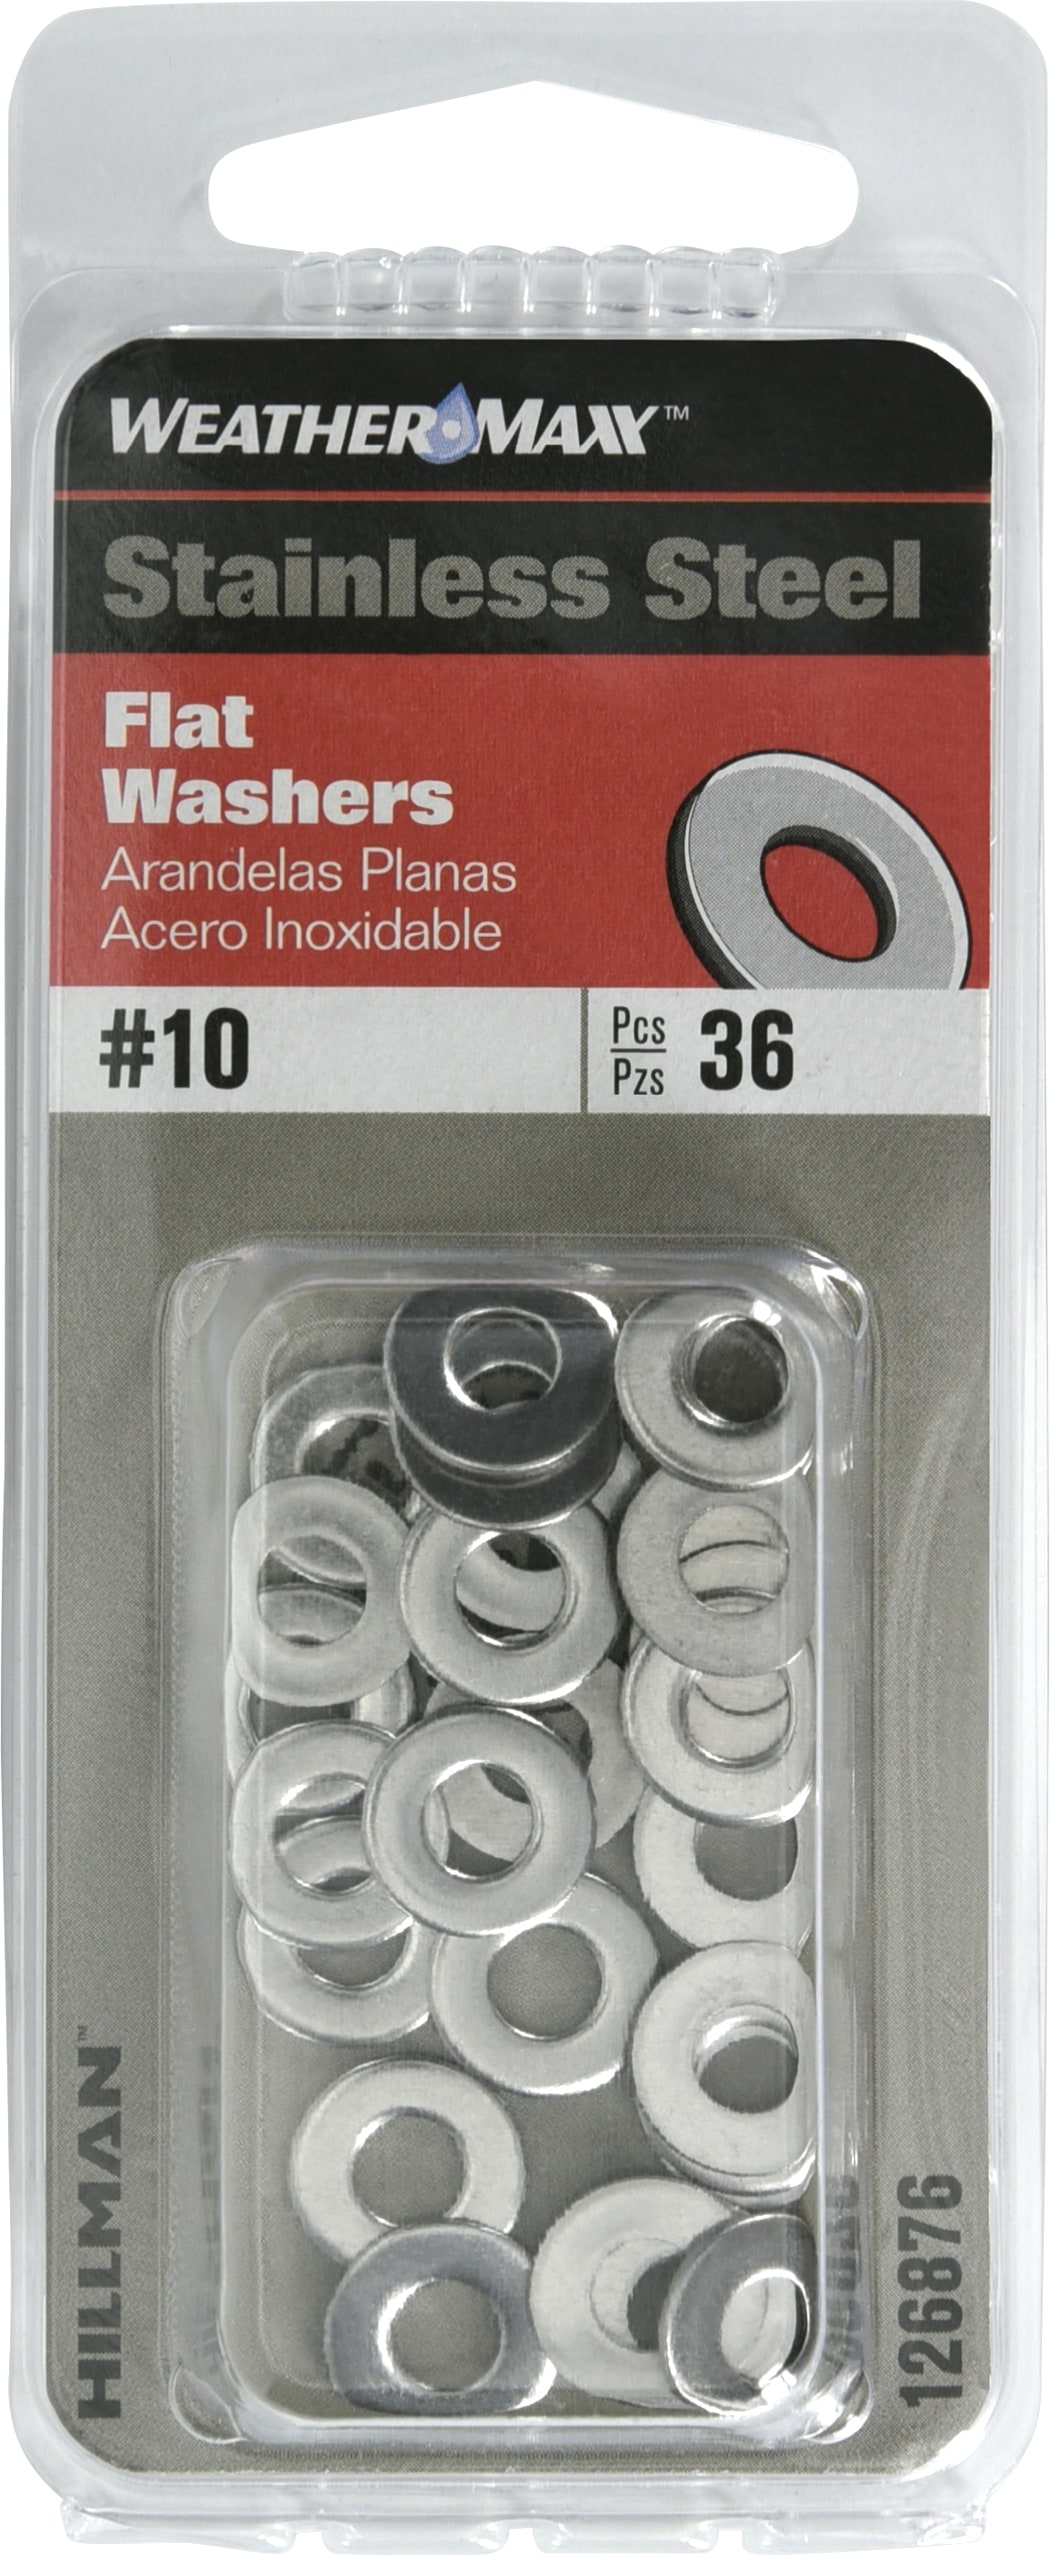 Stainless Steel NAS Flat Washer #10 Qty 100 